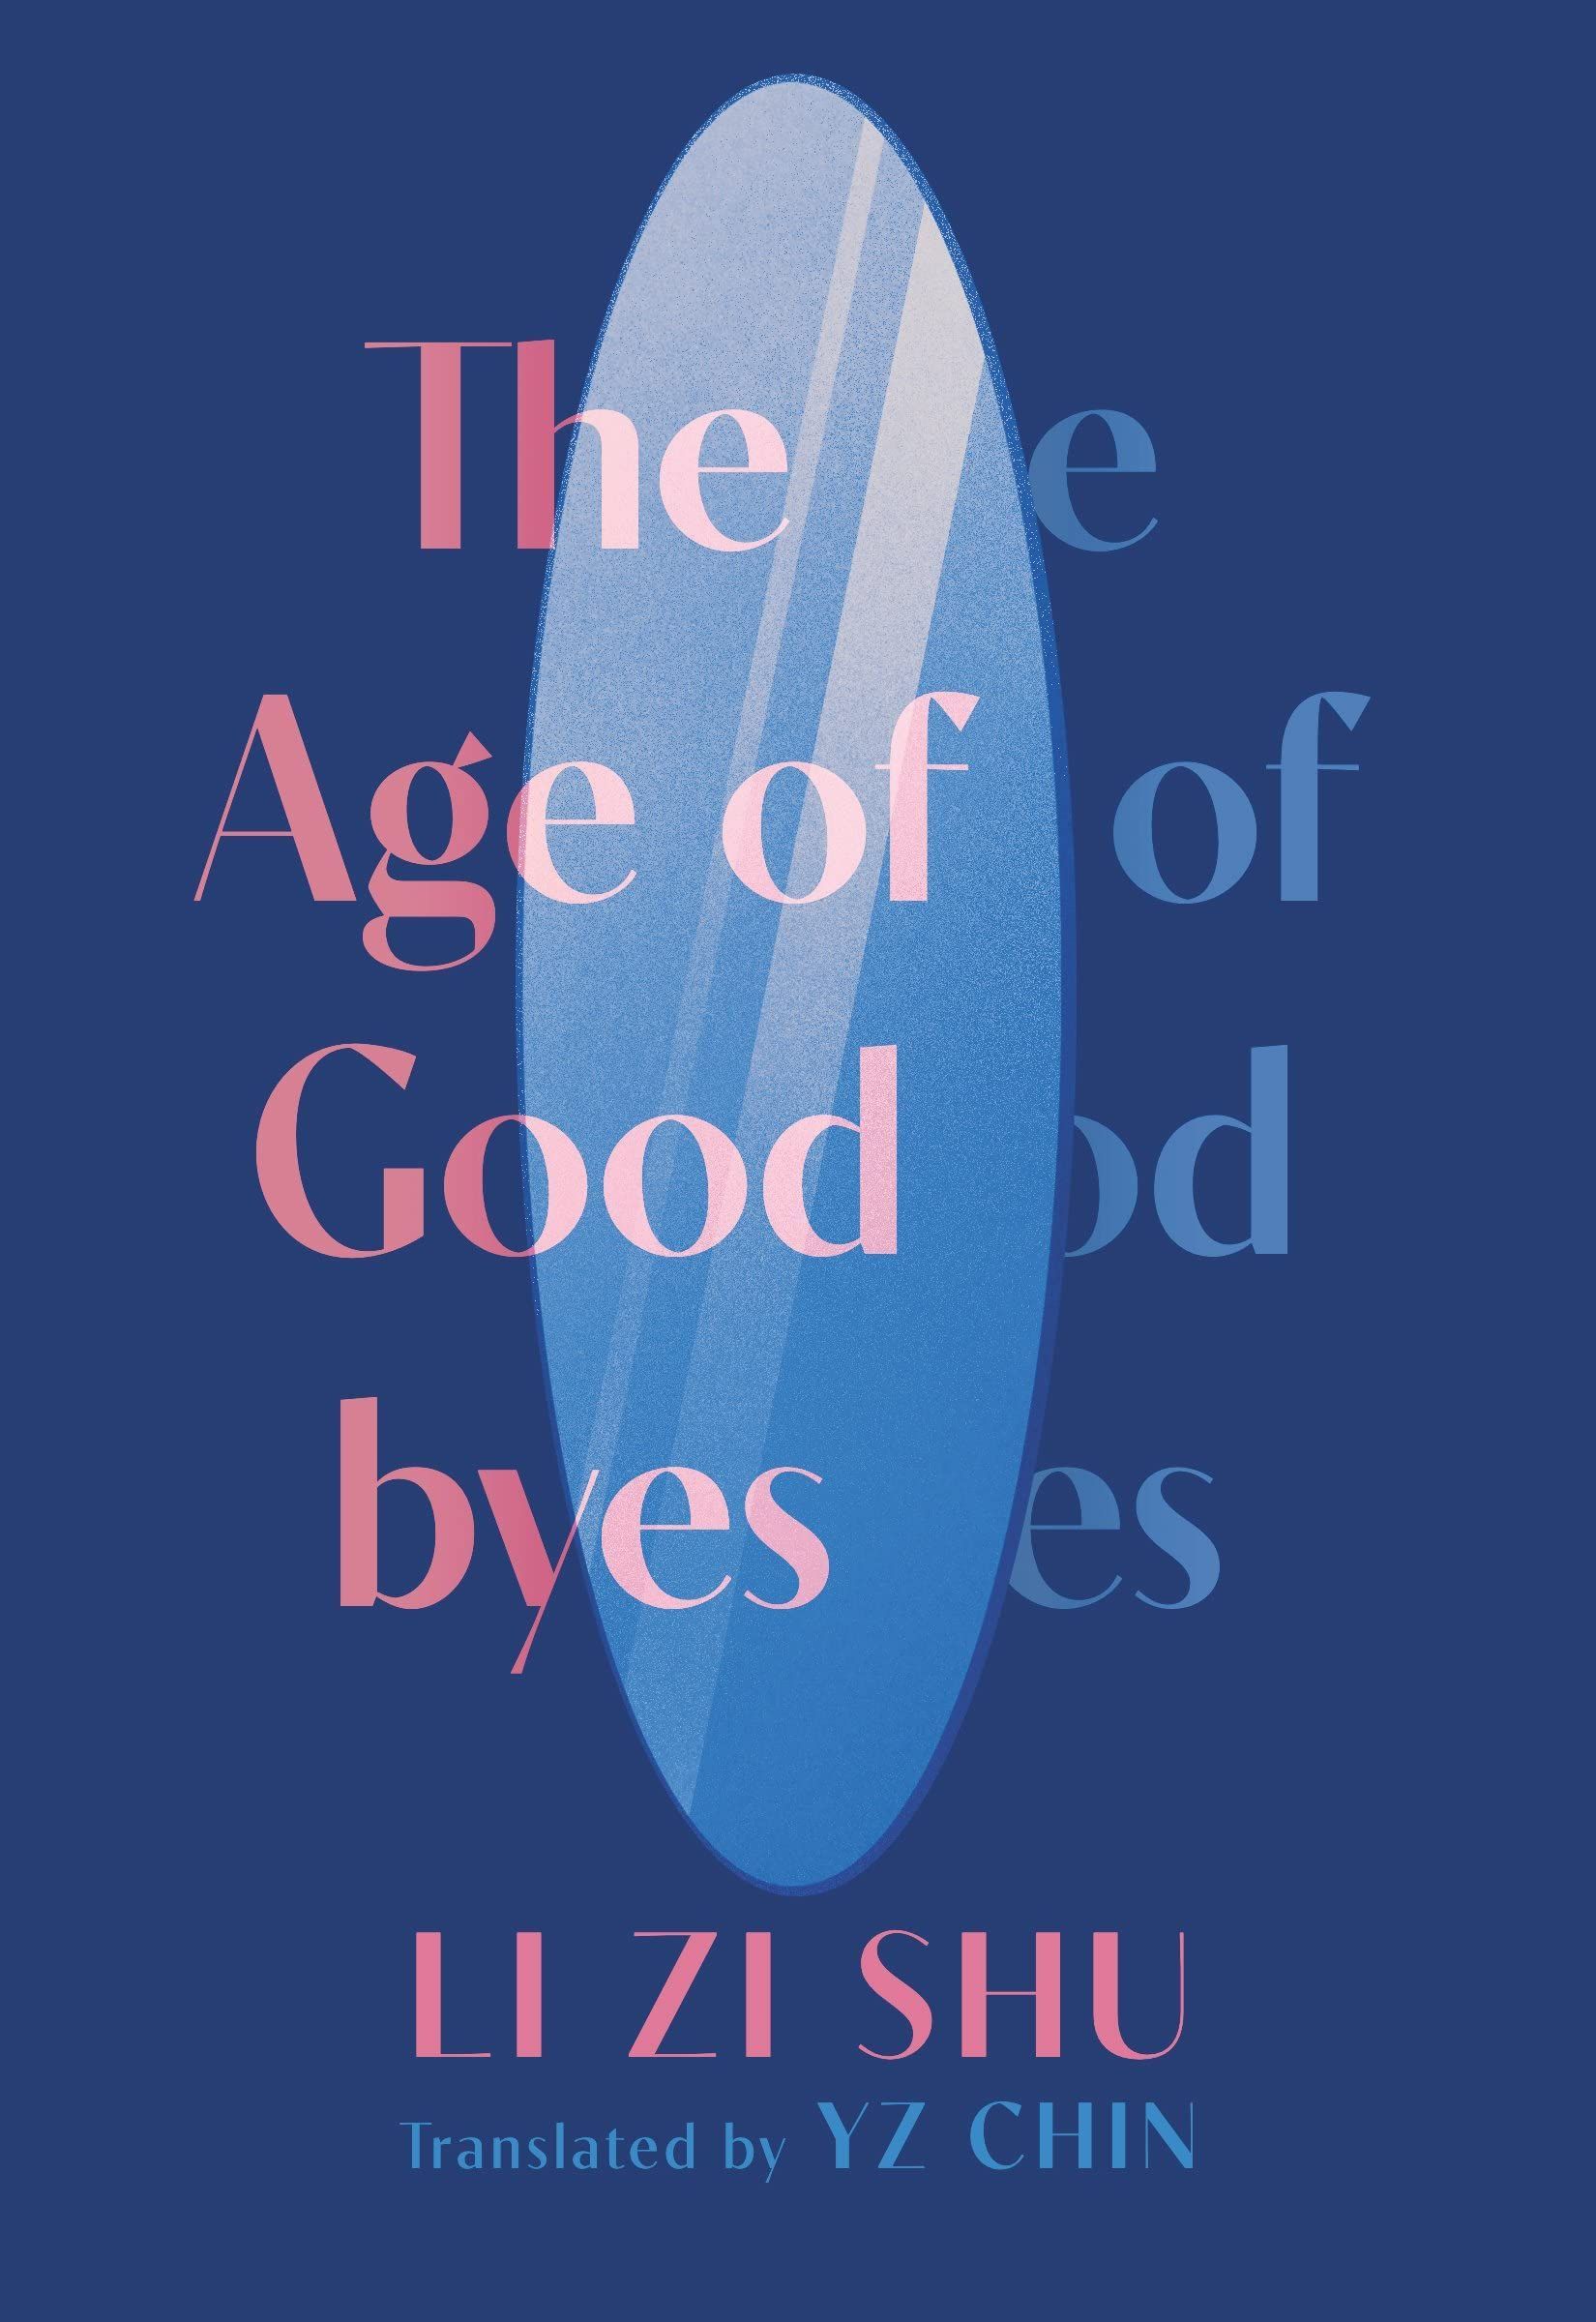 Possibly Related Characters: On Li Zi Shu’s “The Age of Goodbyes”